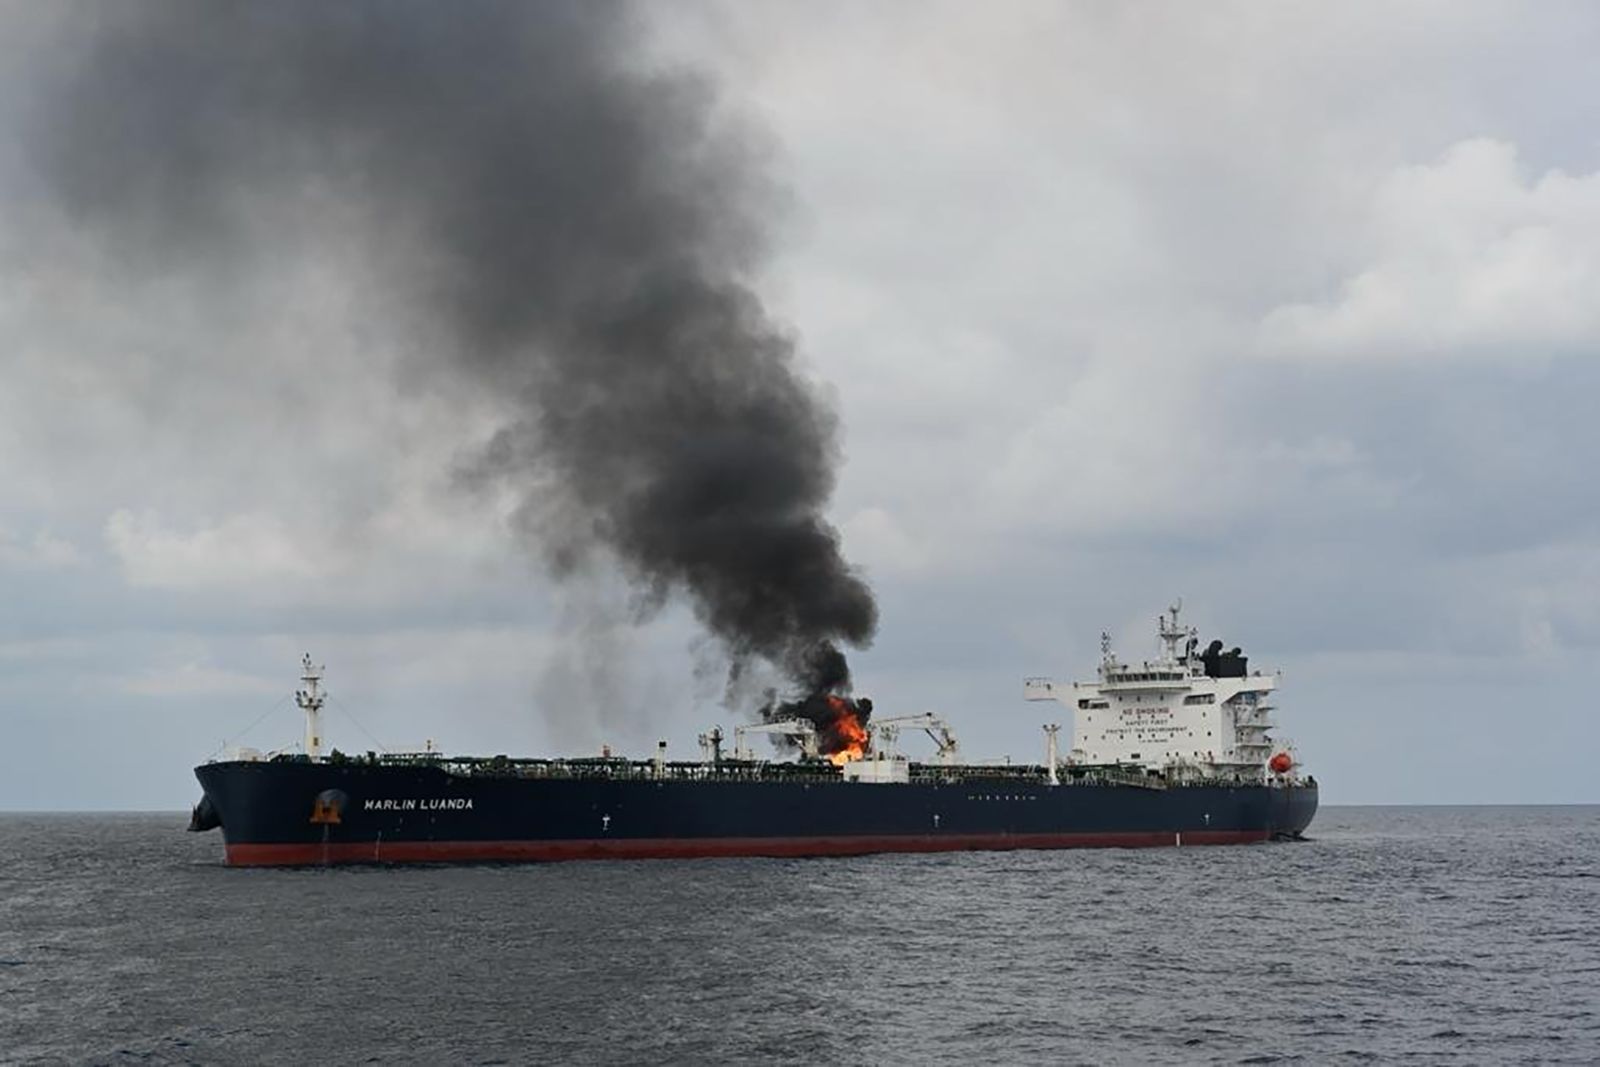 An image posted on X by the Indian Navy on January 27 shows the Marlin Luanda oil tanker on fire in the Gulf of Aden.